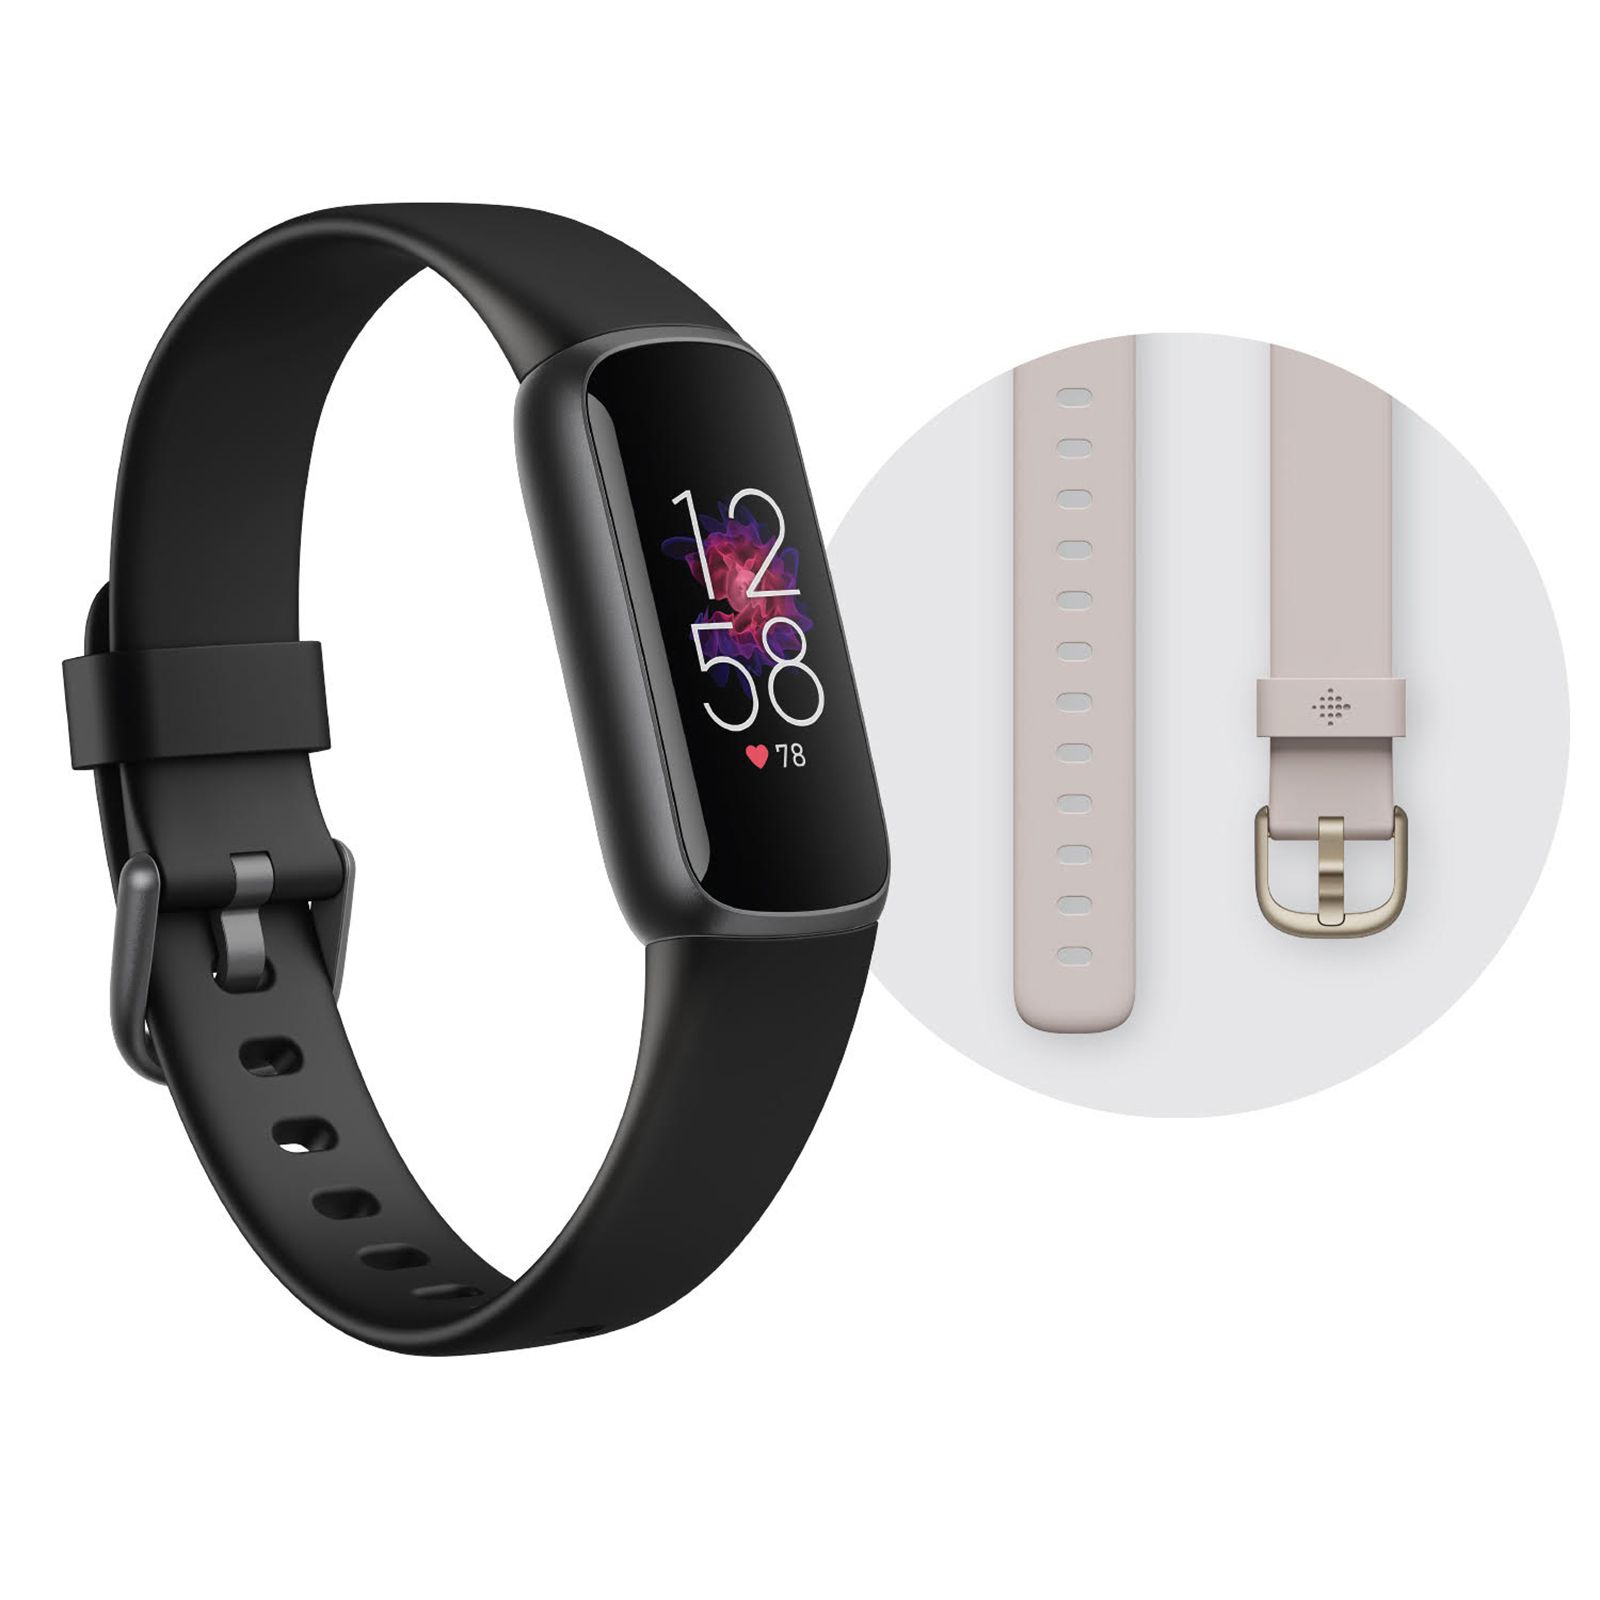 Fitbit Luxe Fitness and Wellness Tracker Bundle - Black